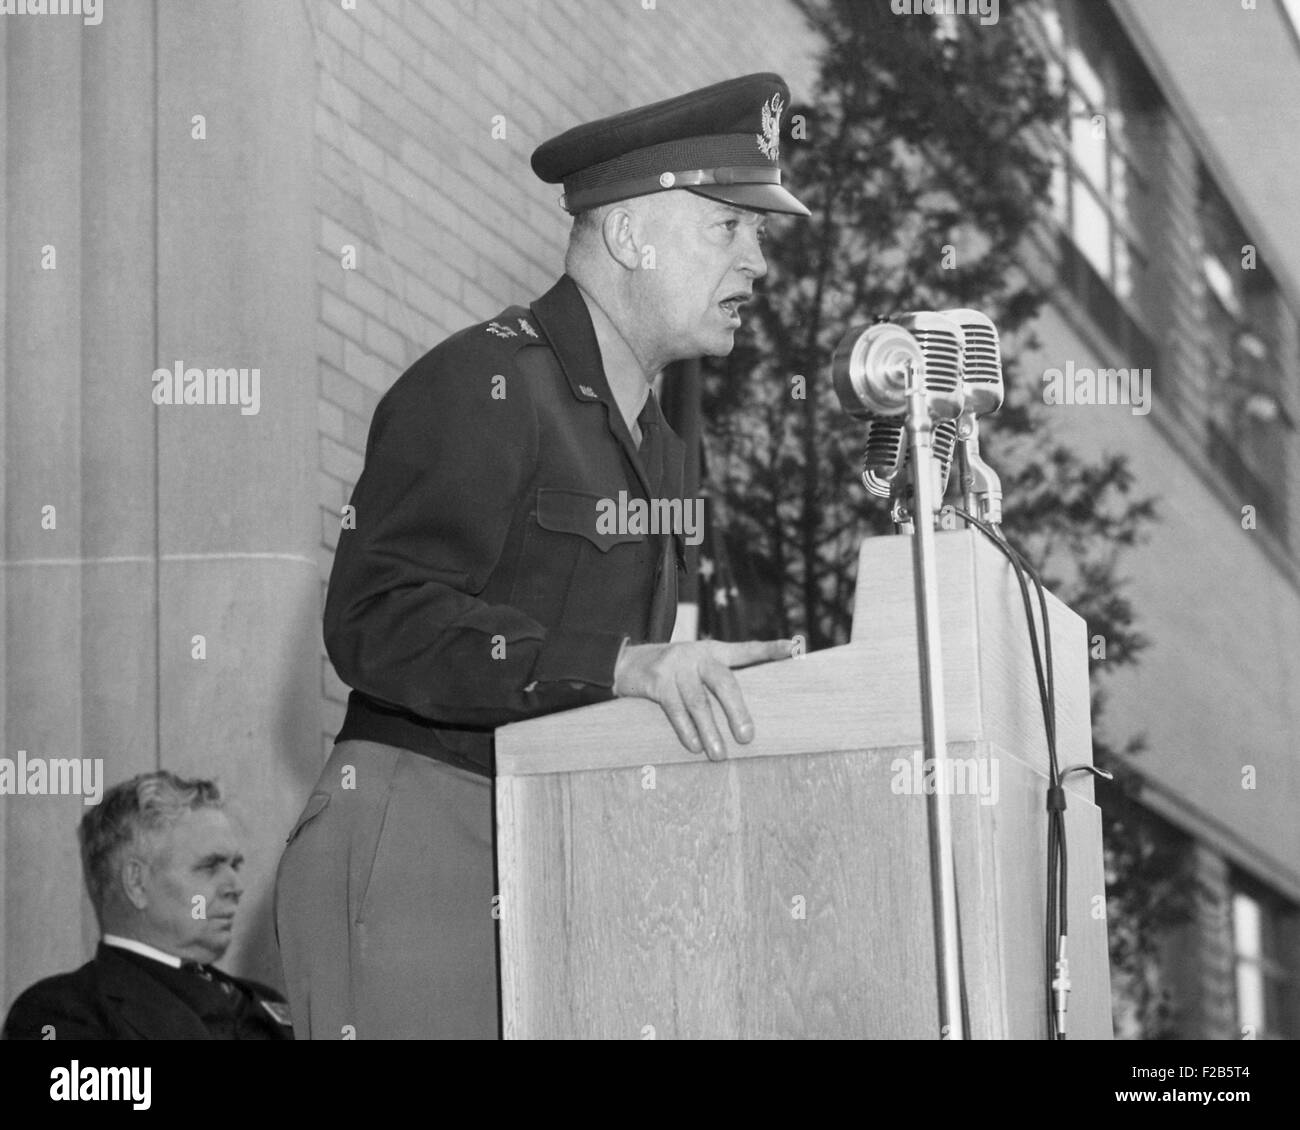 Gen. Eisenhower speaking at the Aircraft Engine Research Laboratory at Lewis Field, Cleveland, Ohio. Center Director, Edward 'Ray' Sharp, who would become one of the founders of the NASA space program, is at left. - (BSLOC 2014 16 64) Stock Photo